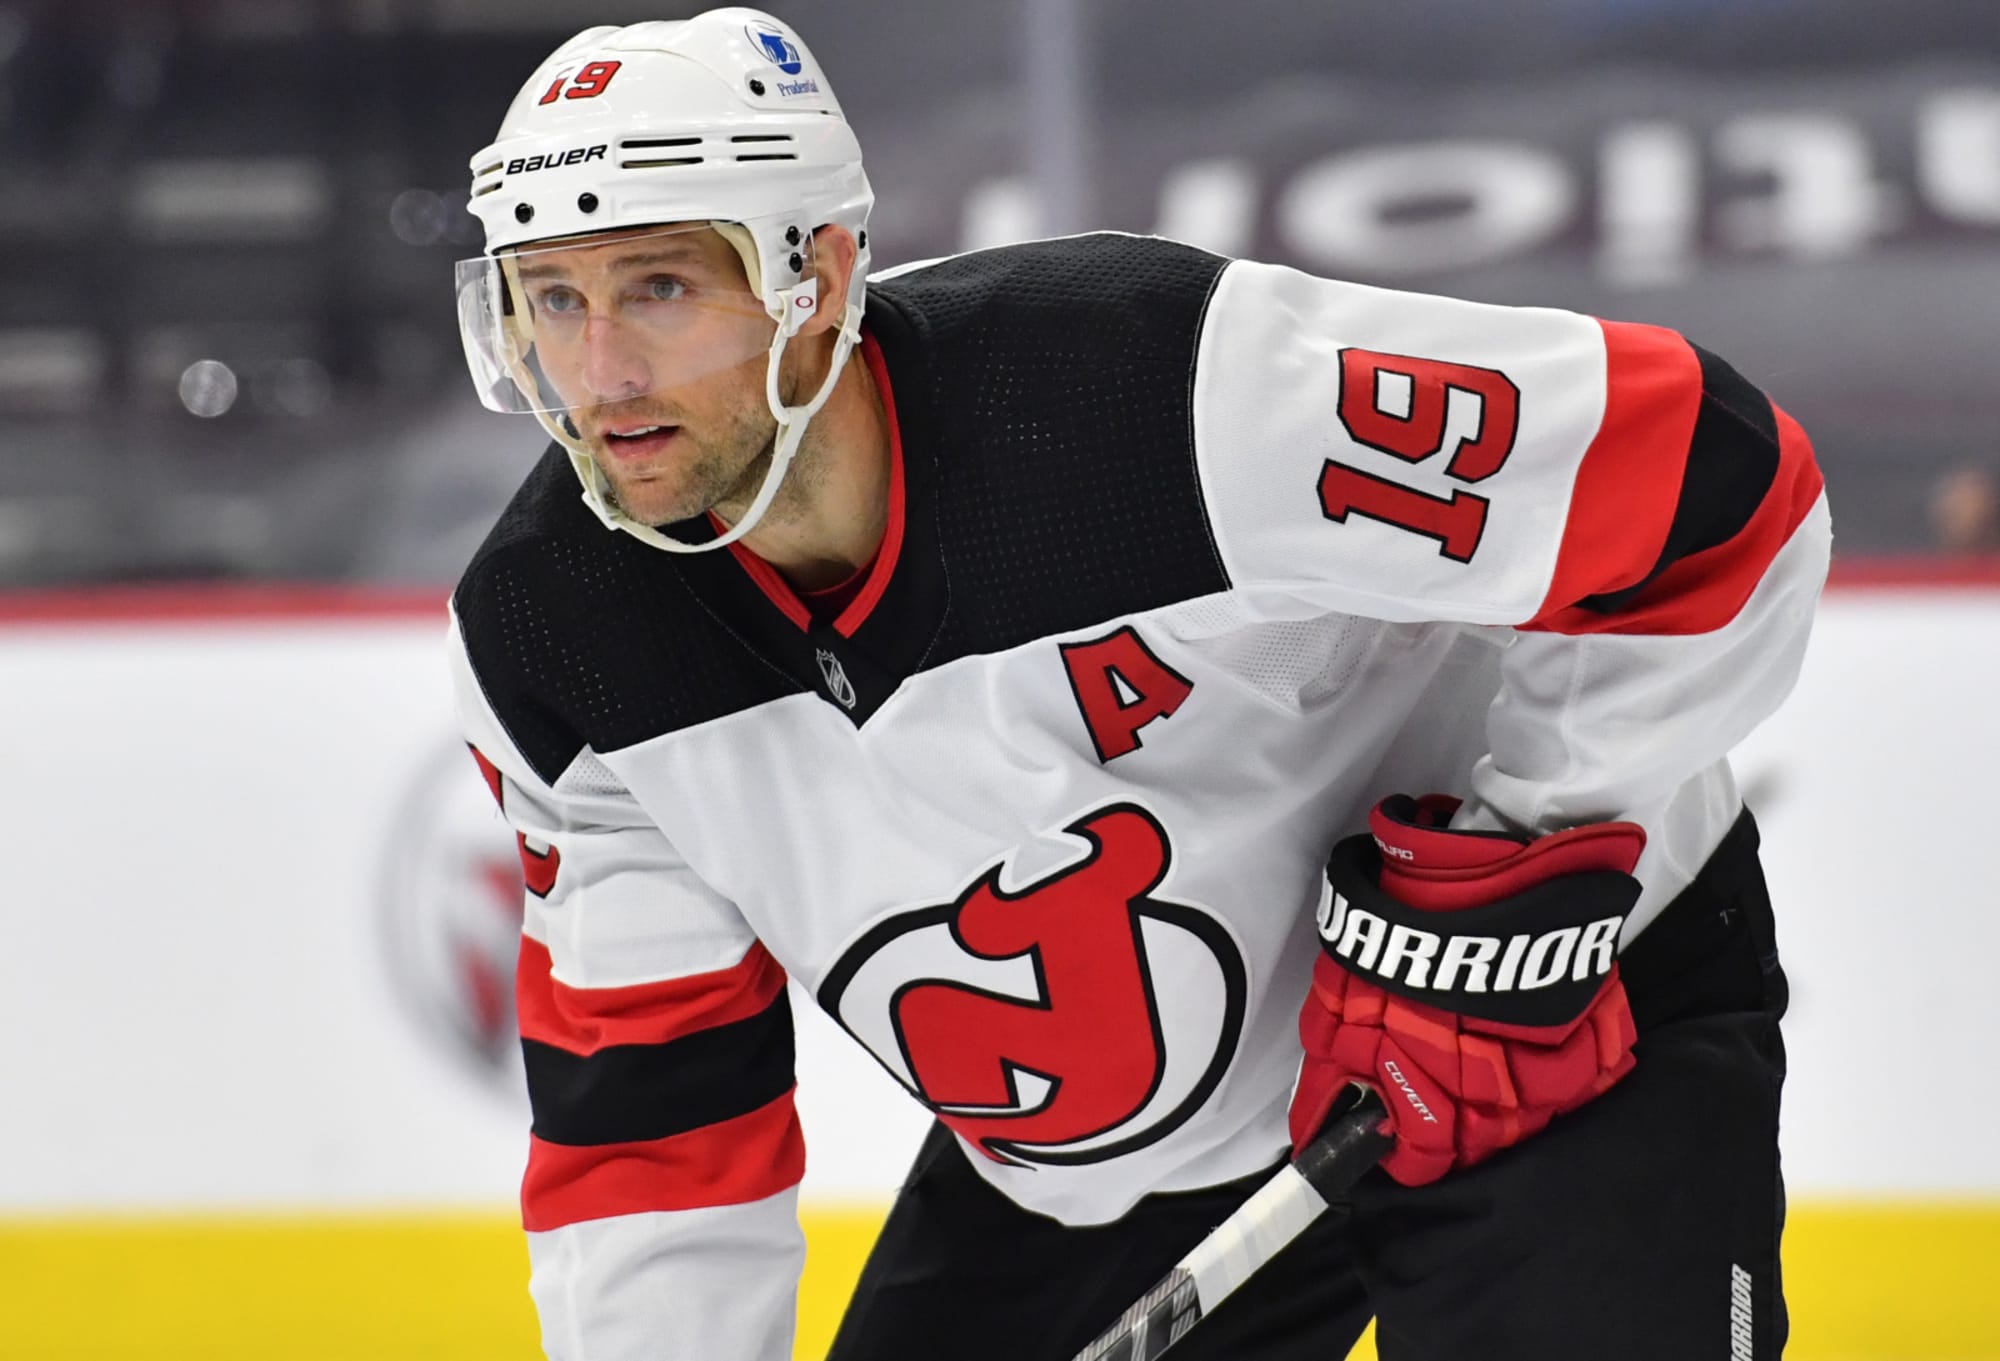 Devils' top centre Travis Zajac out 4-6 months with pectoral injury